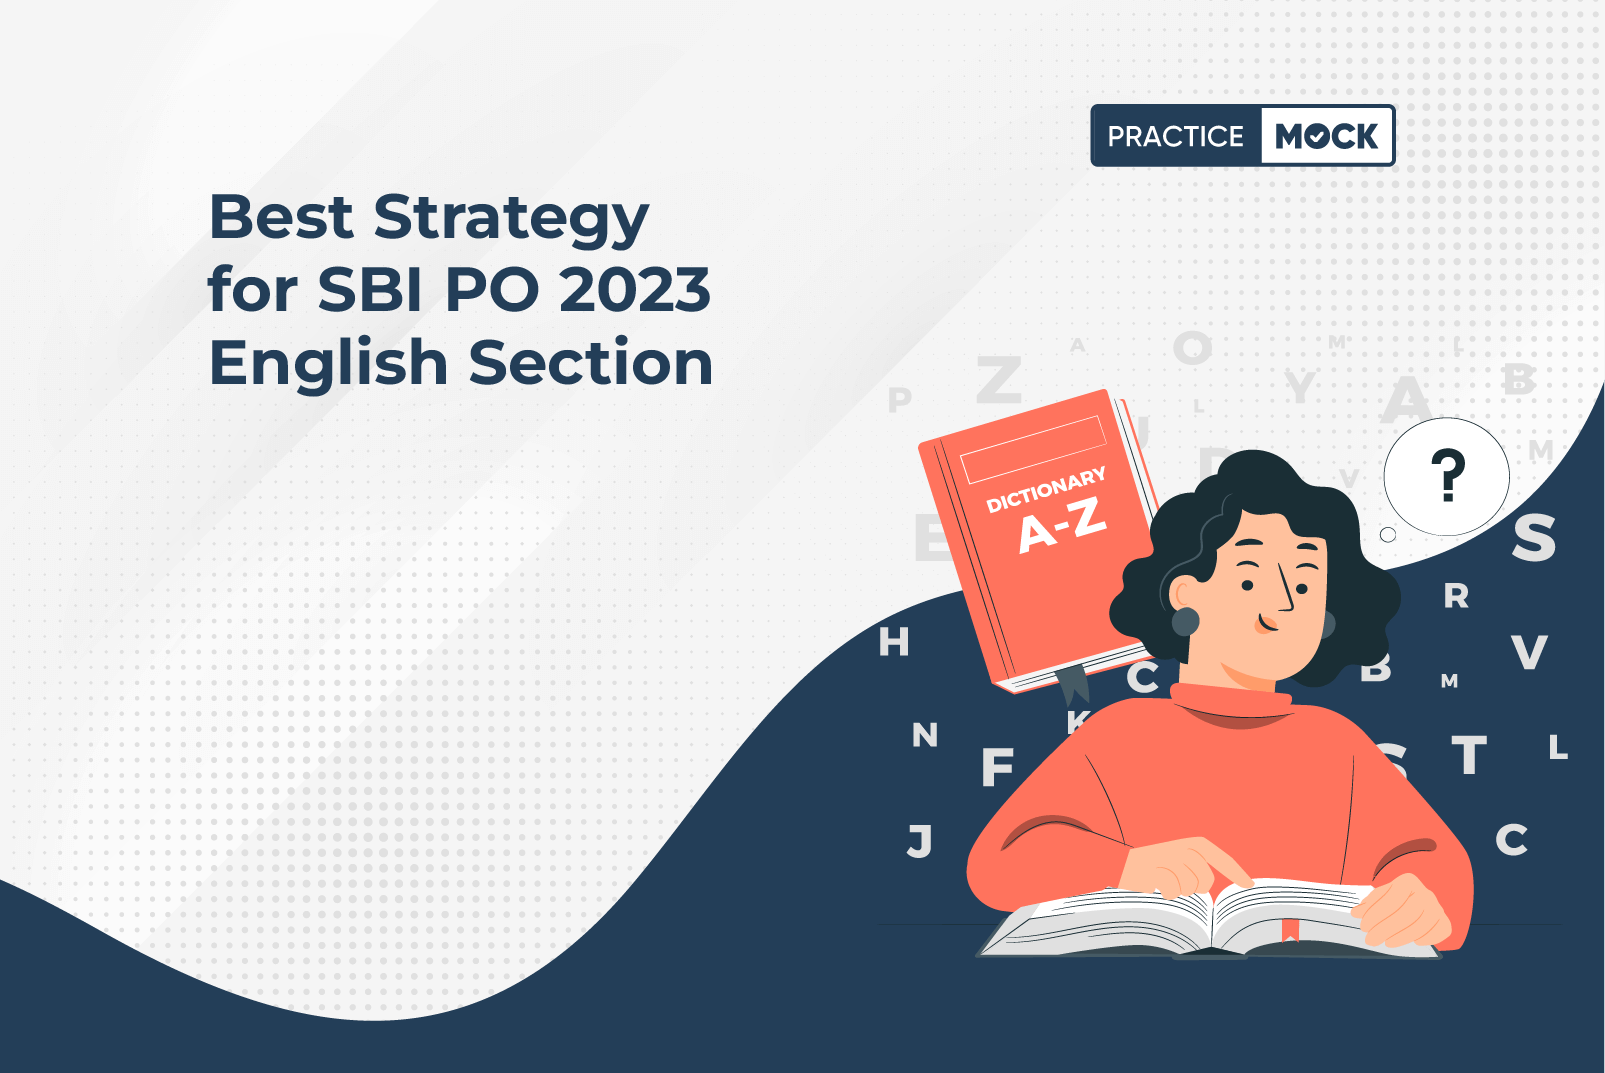 English Strategy for SBI PO 2023